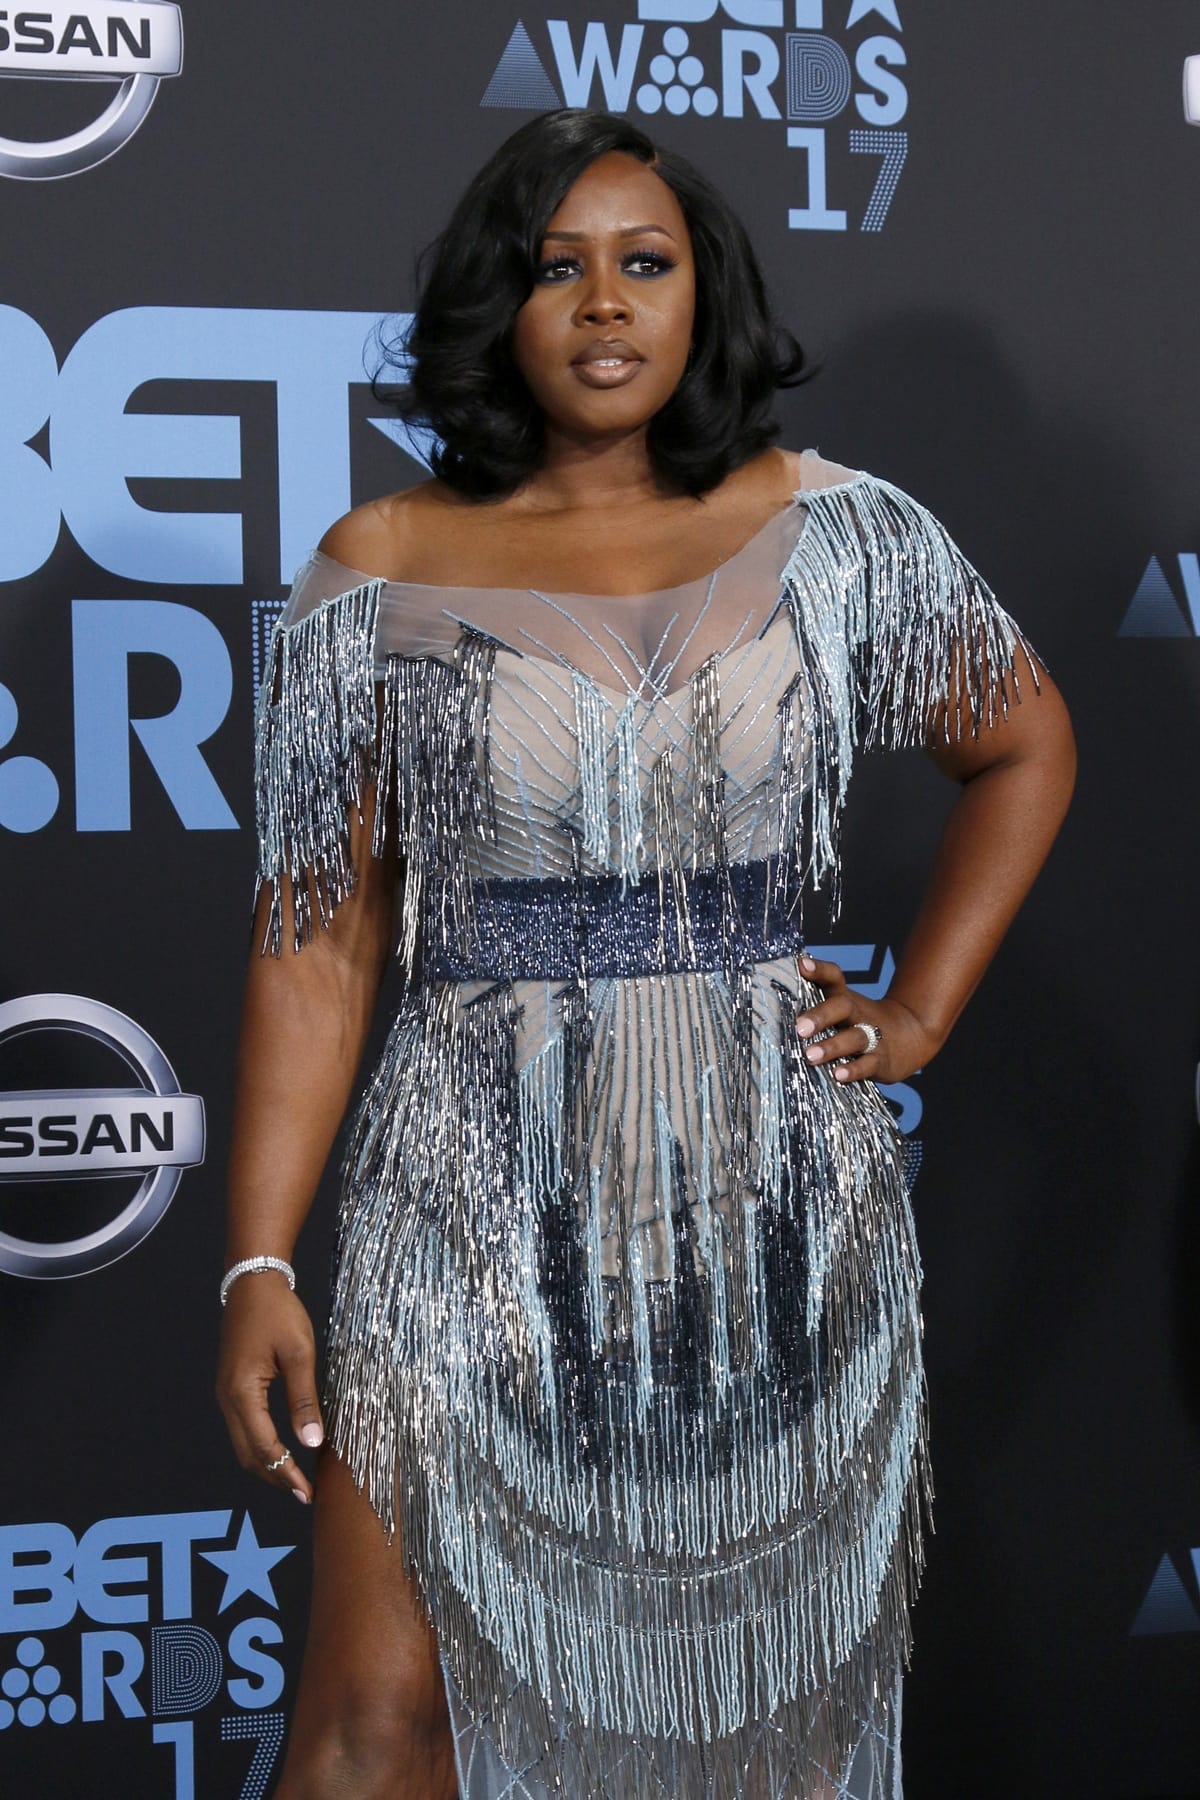 Remy Ma, who received the prestigious title of Best Female Hip-Hop Artist at the BET Awards 2017 held at the Microsoft Theater in Los Angeles, has not only achieved recognition in the industry but has also amassed a net worth of approximately $4 million